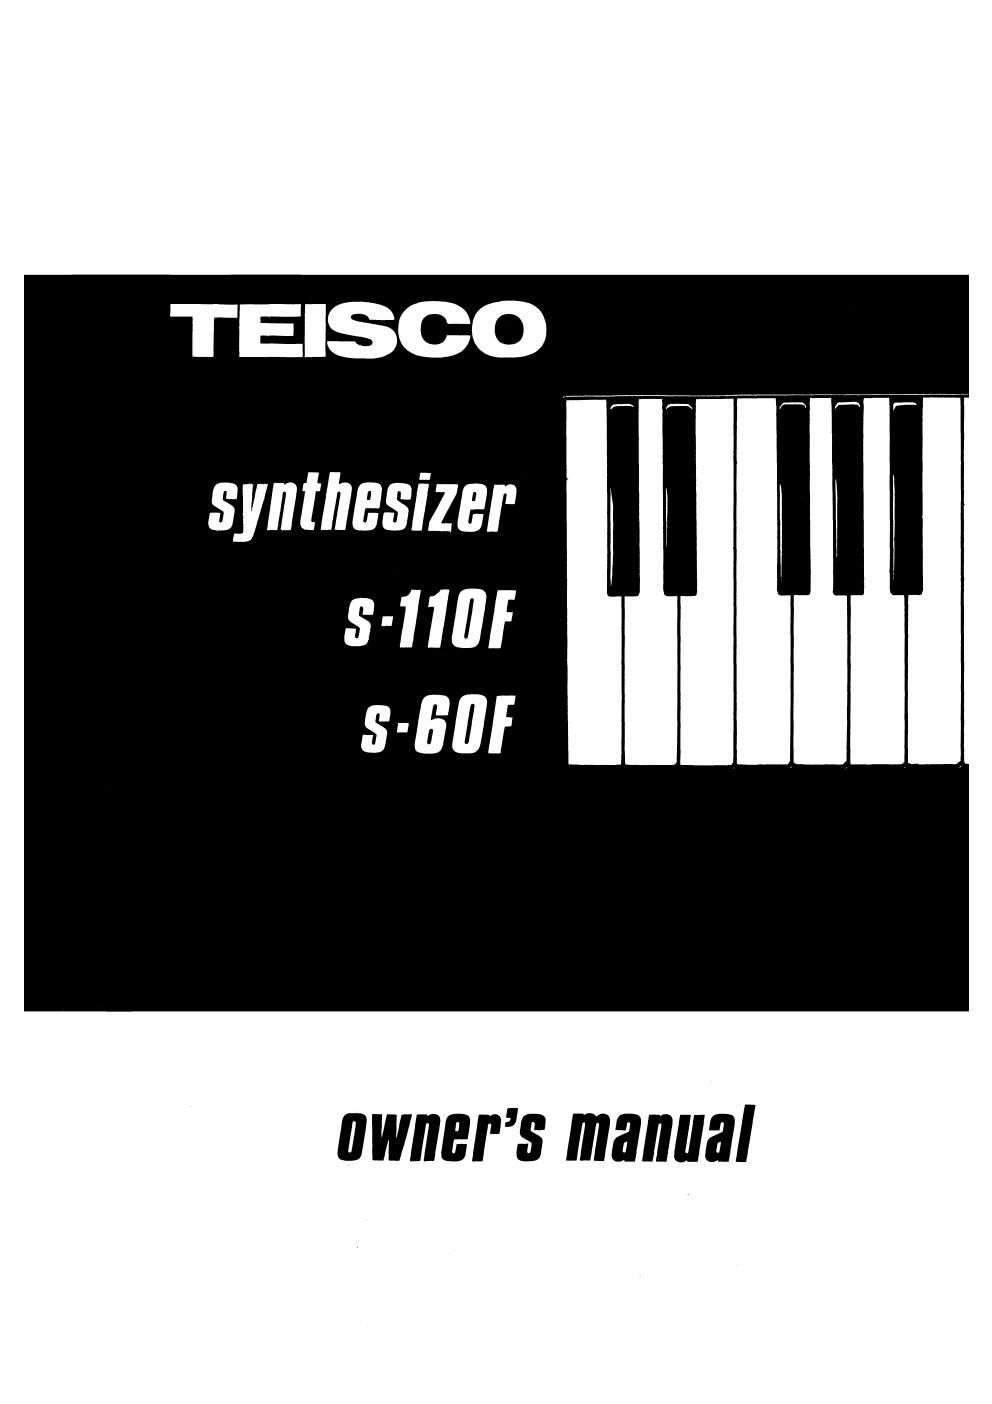 teisco s 110f 60f owner manual